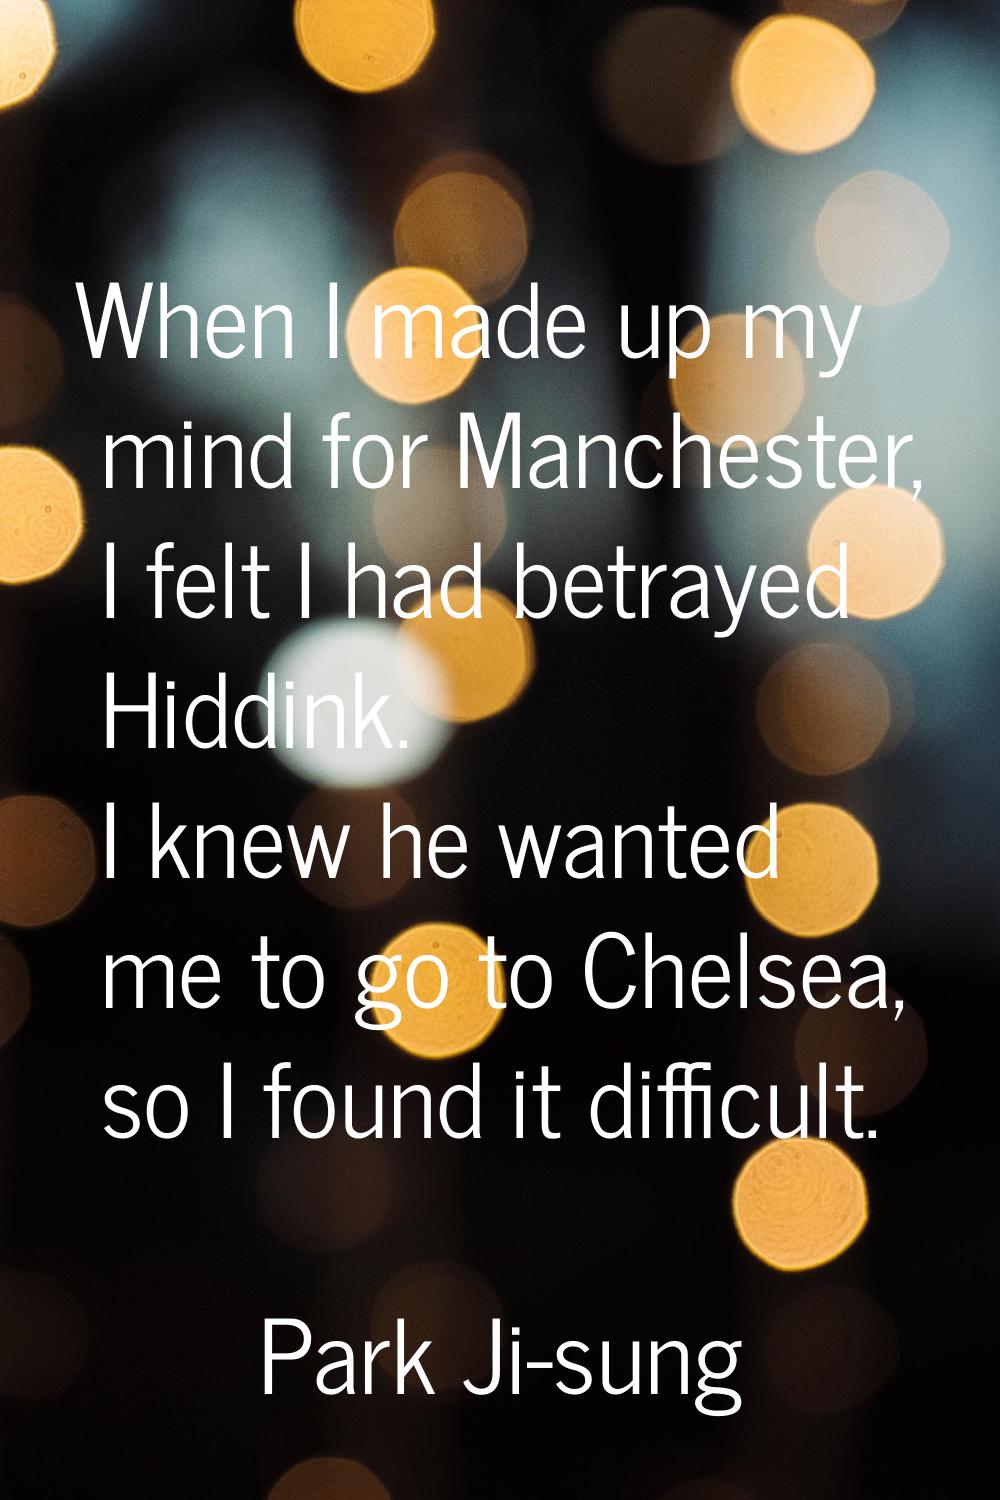 When I made up my mind for Manchester, I felt I had betrayed Hiddink. I knew he wanted me to go to 